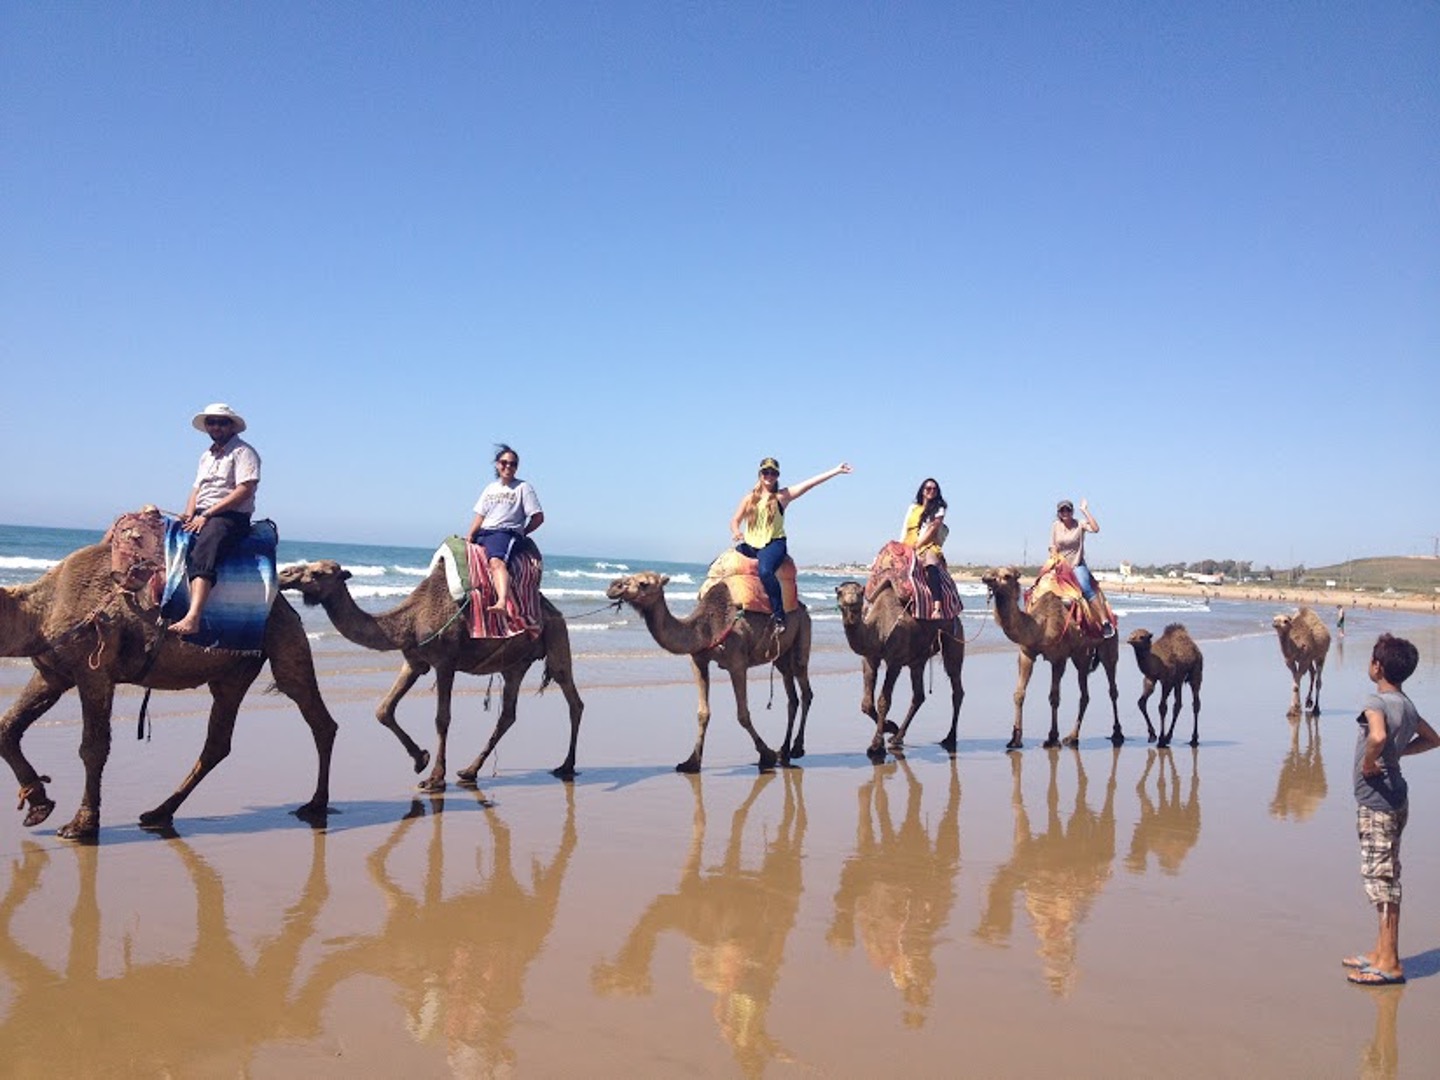 Dr. Bachkar and students on camels during a trip to Morocco